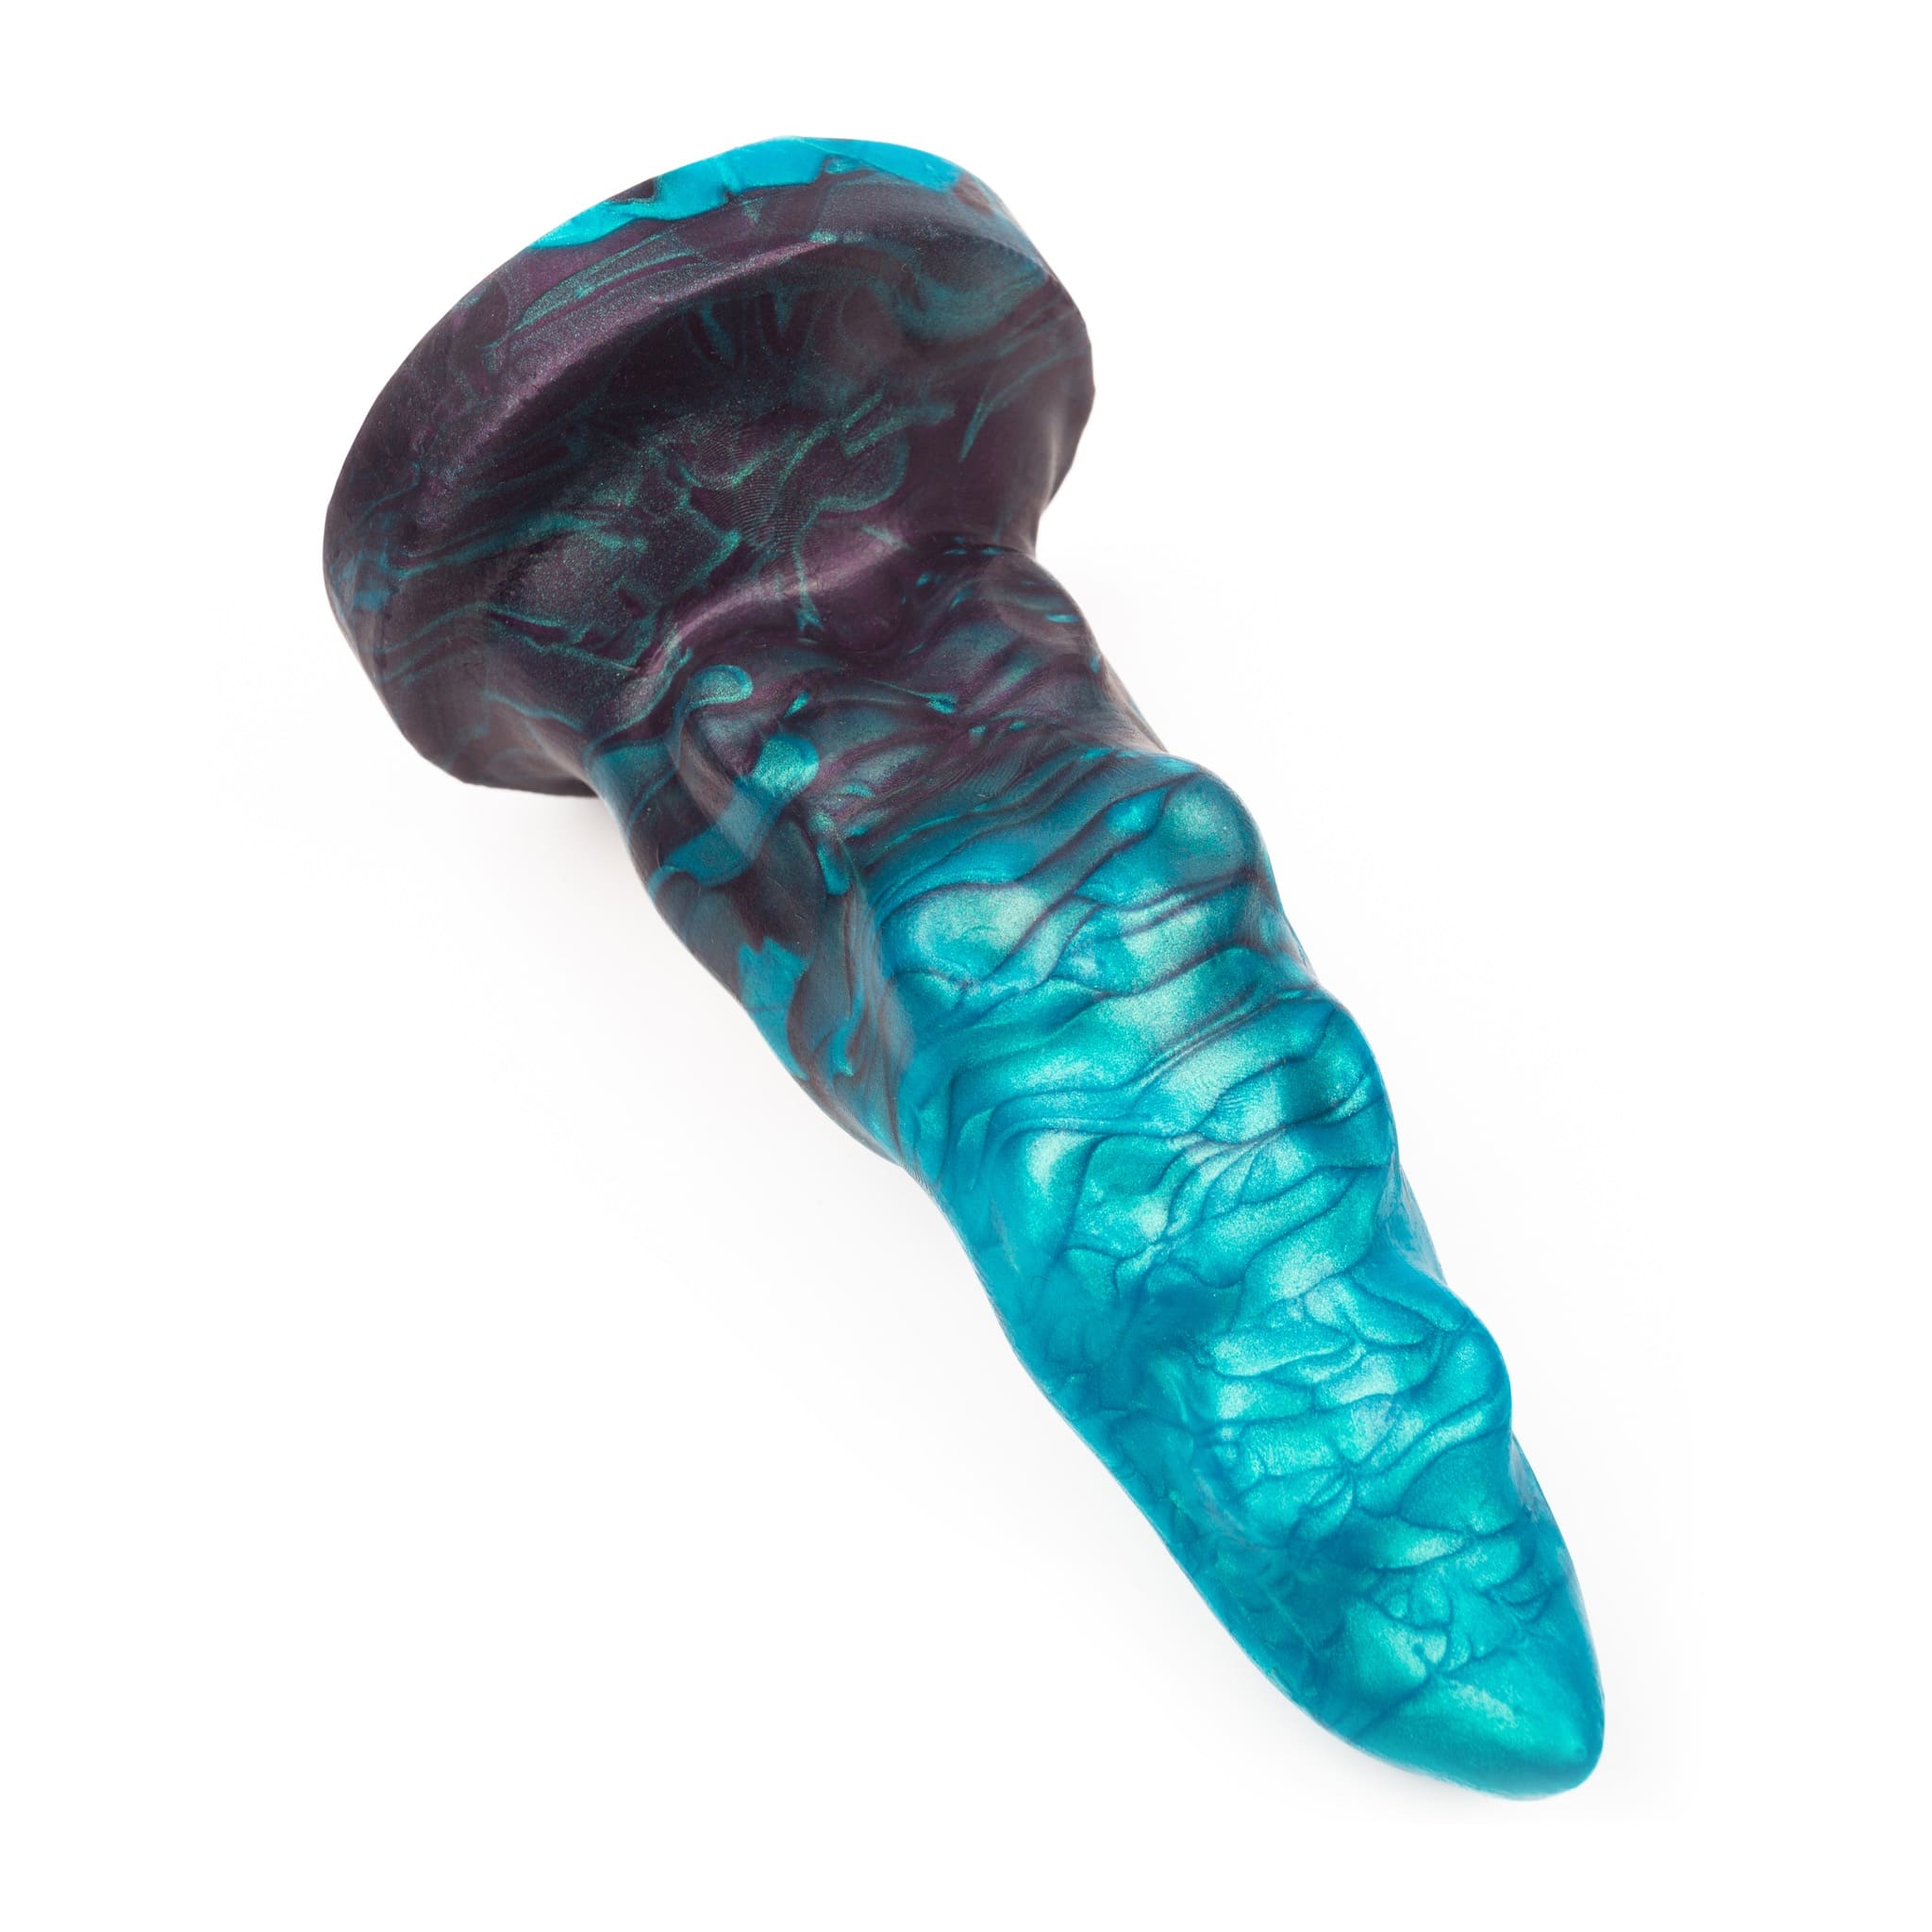 FAB.toys Tentacle silicone toy